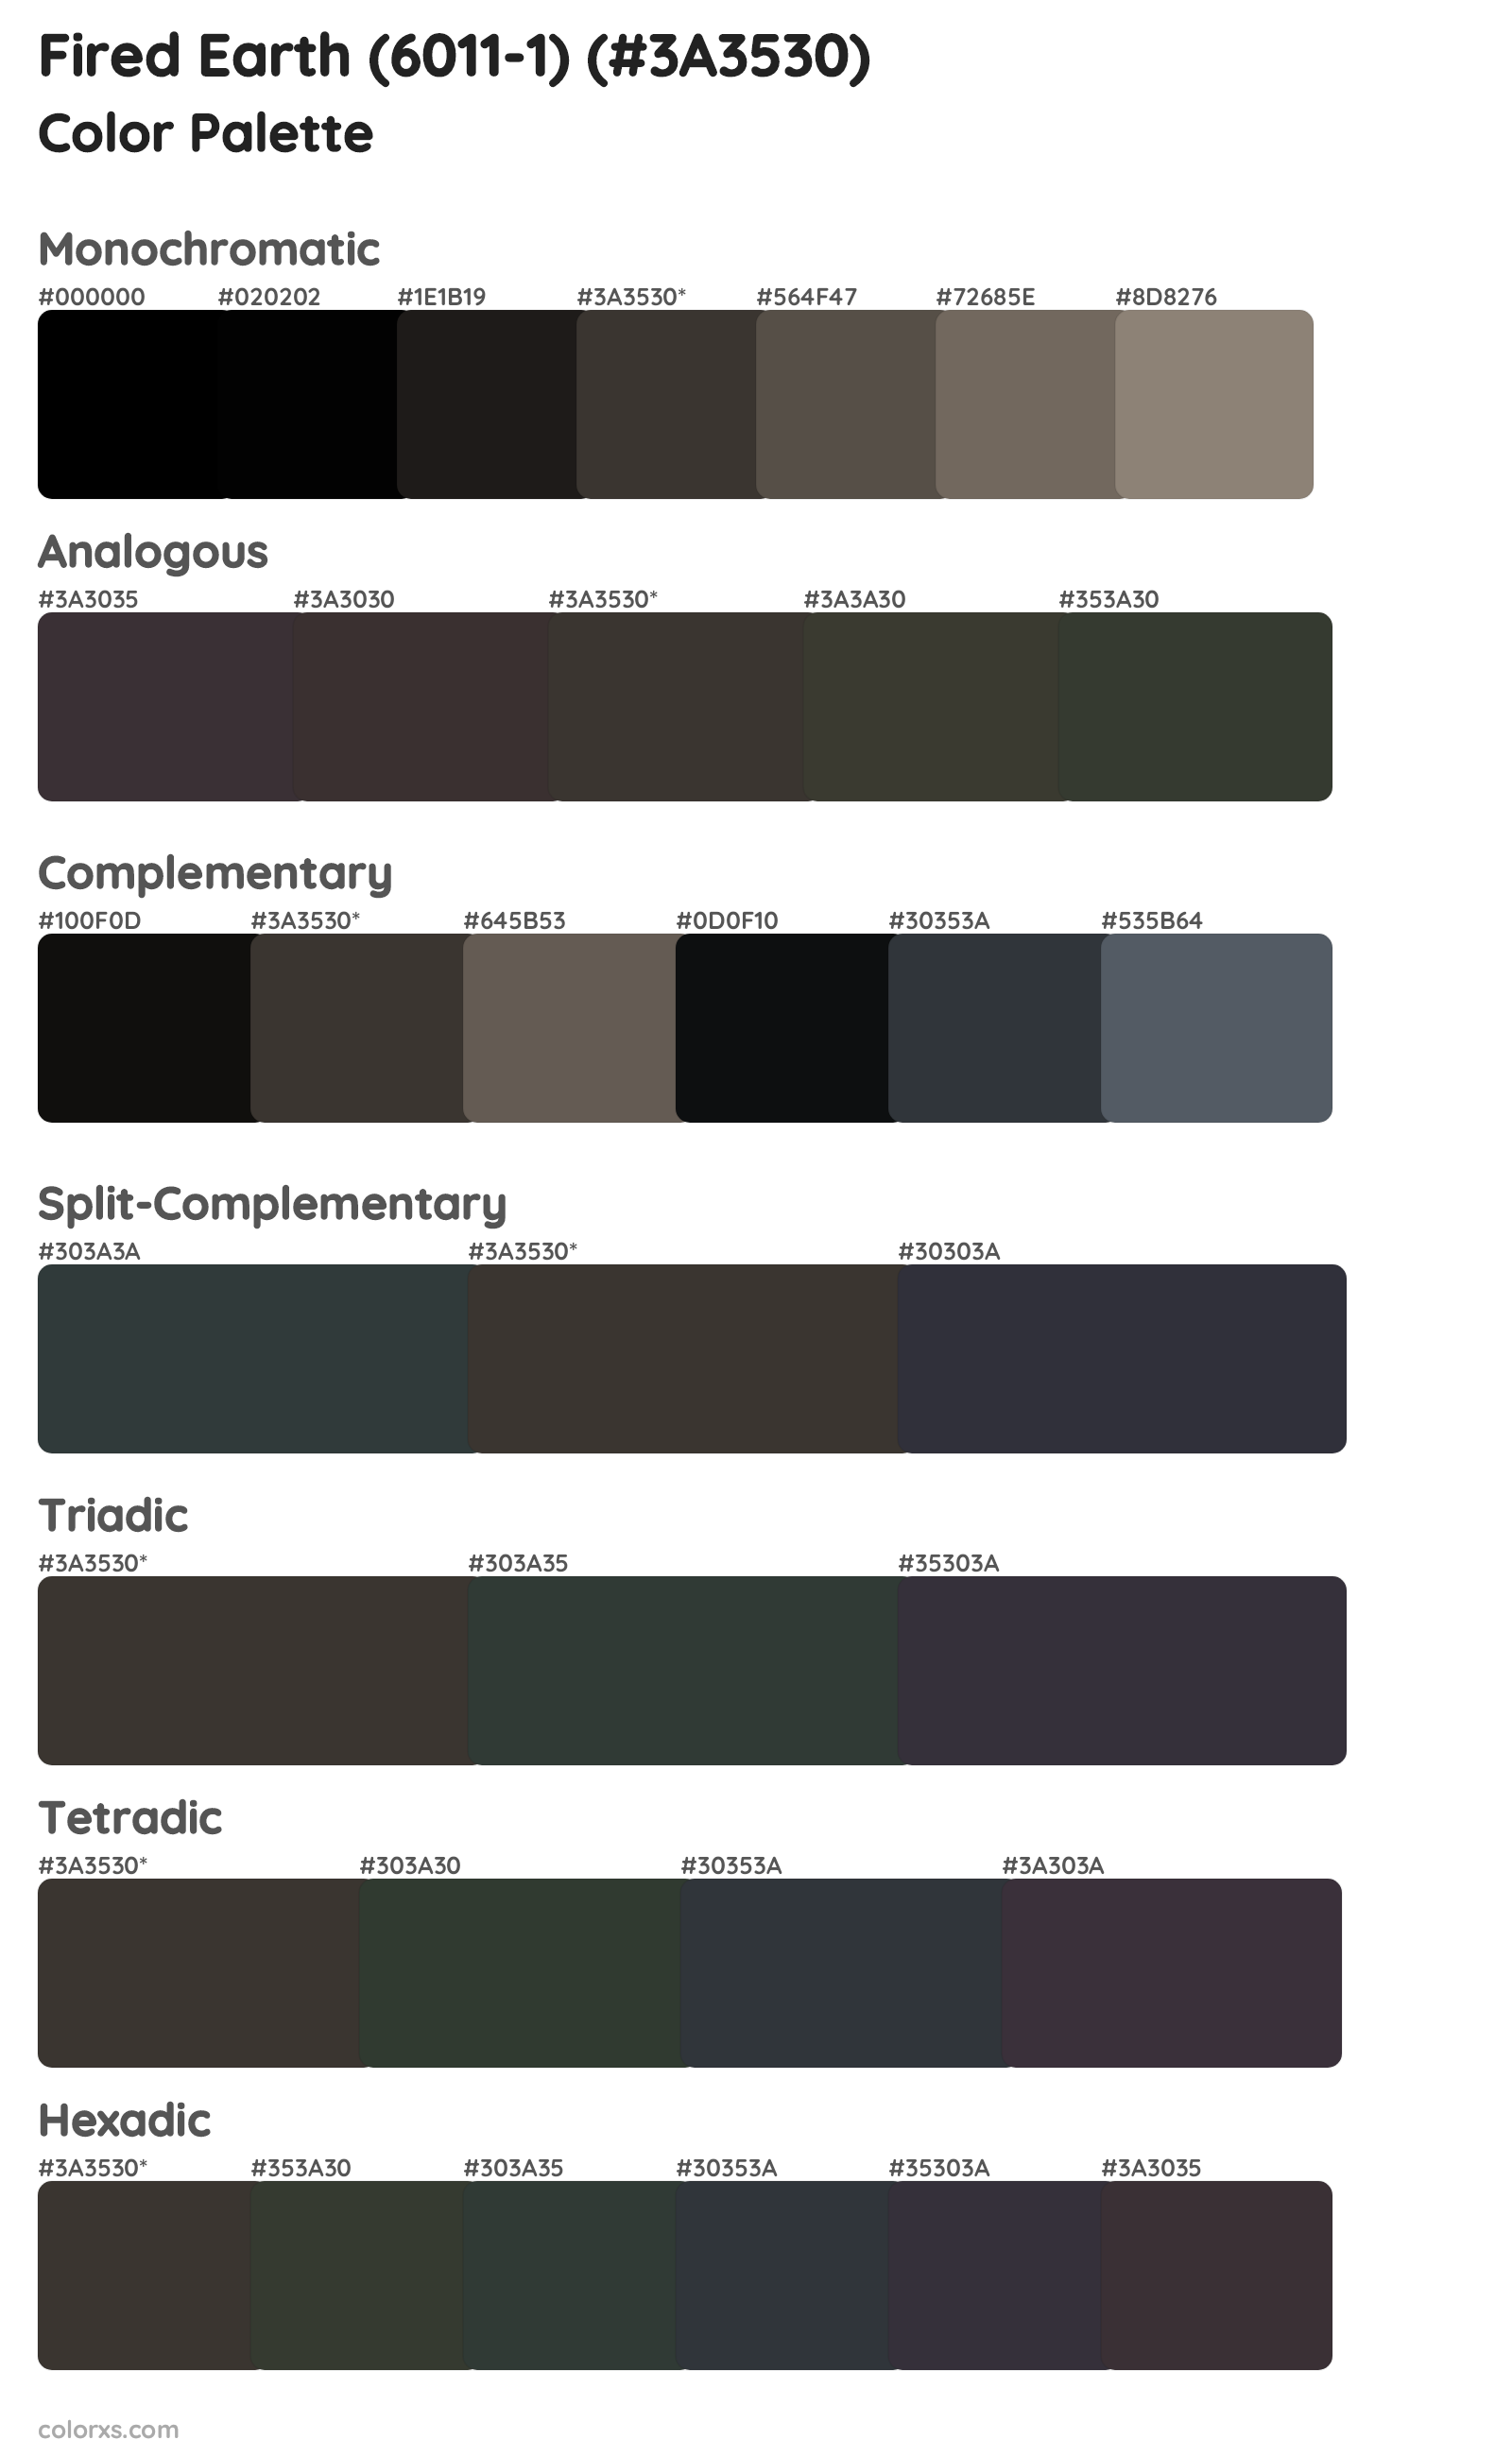 Fired Earth (6011-1) Color Scheme Palettes